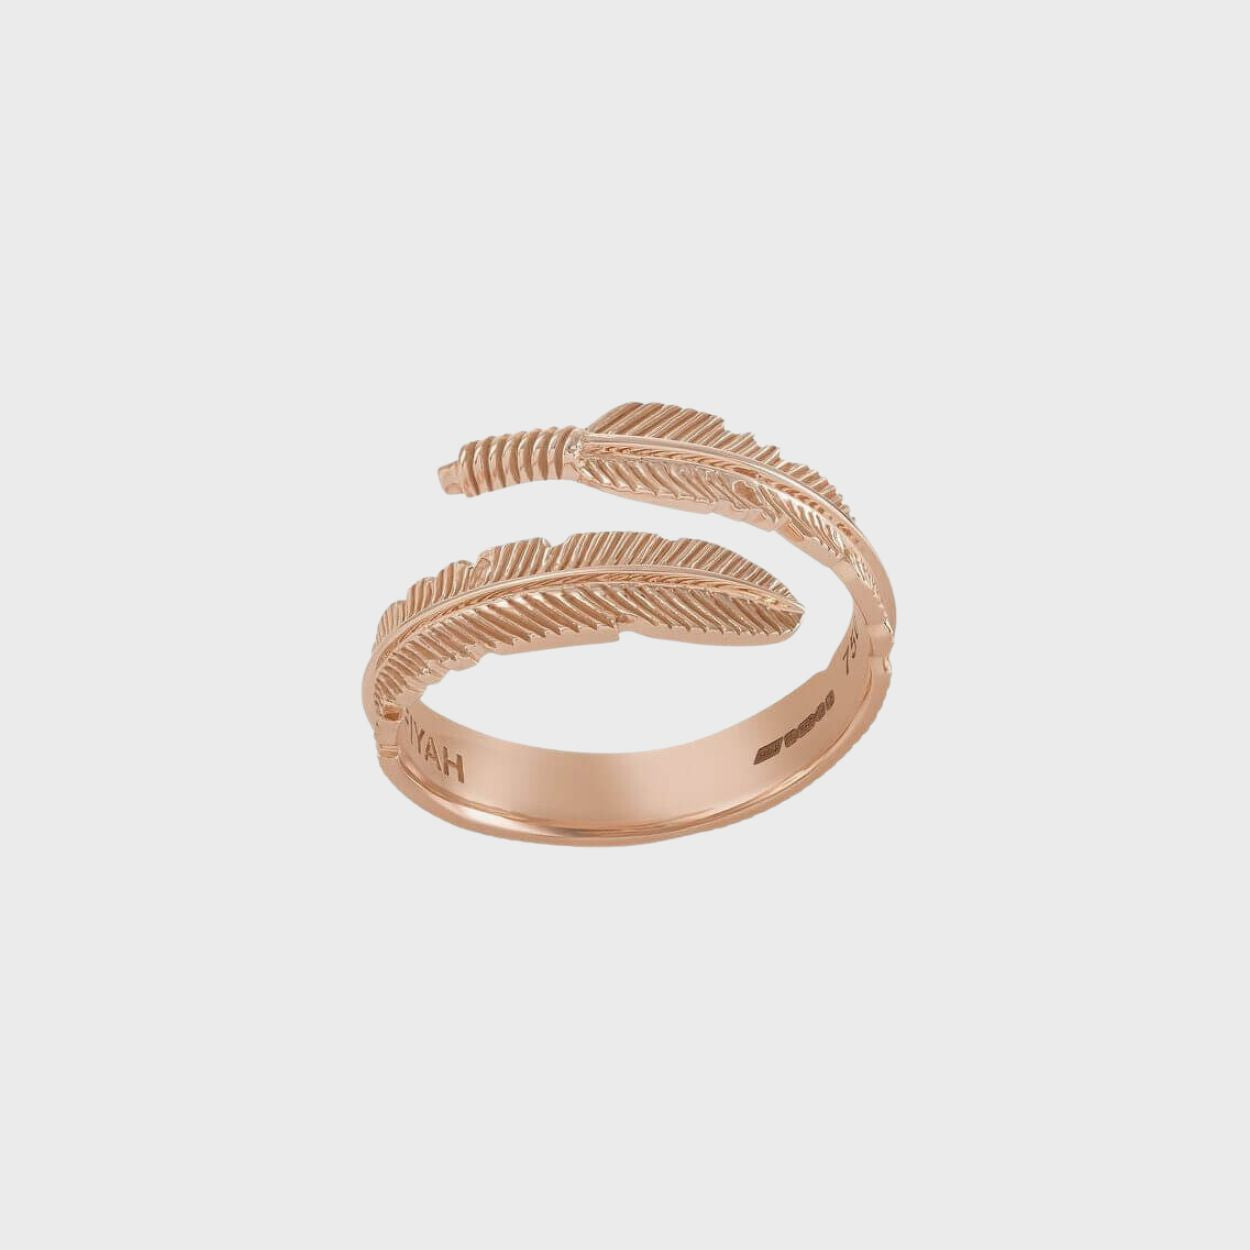 18ct Gold Adjustable Plume Ring